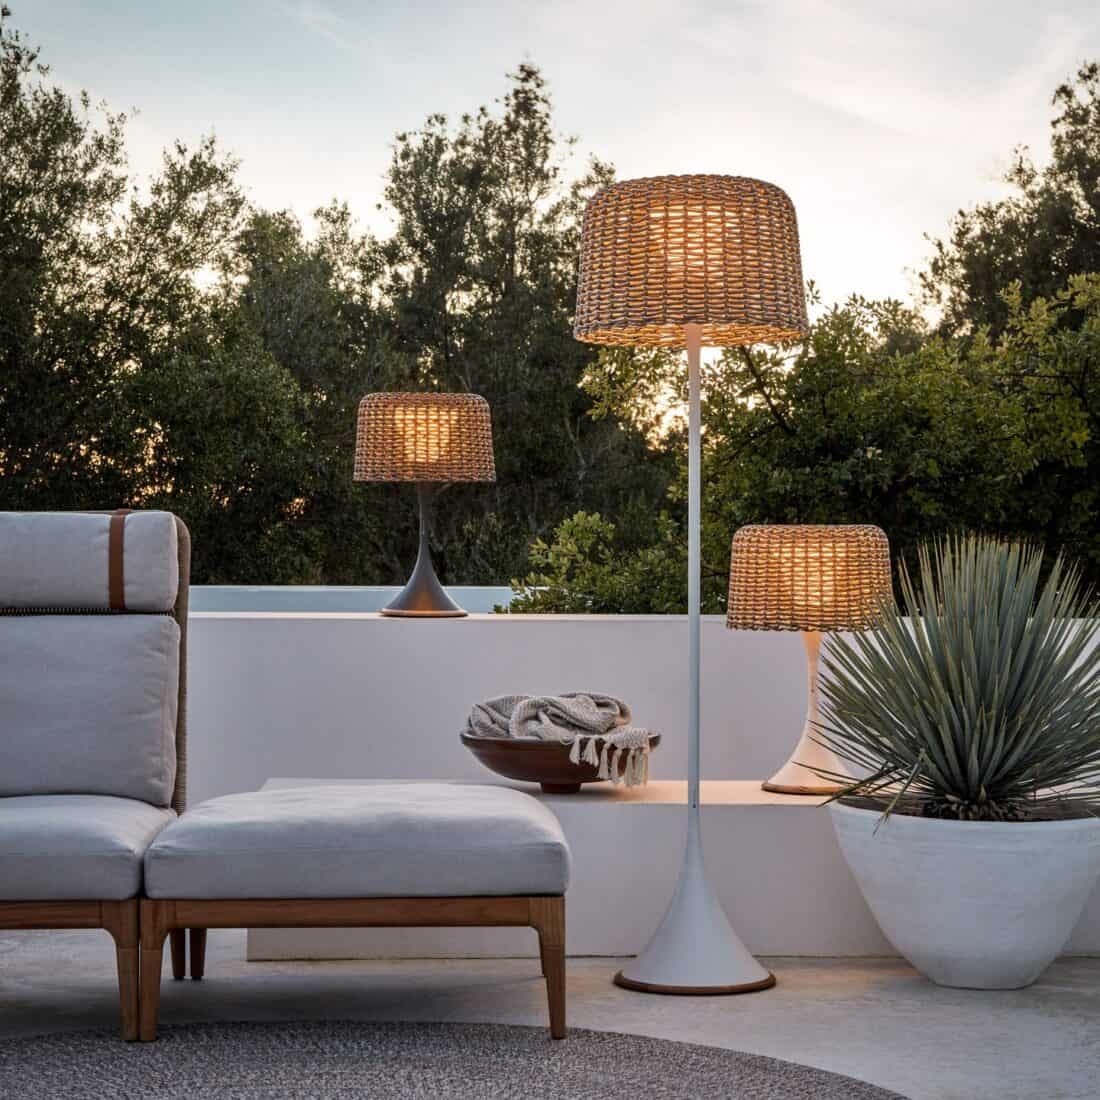 A lounge chair and wicker lamp on a patio.